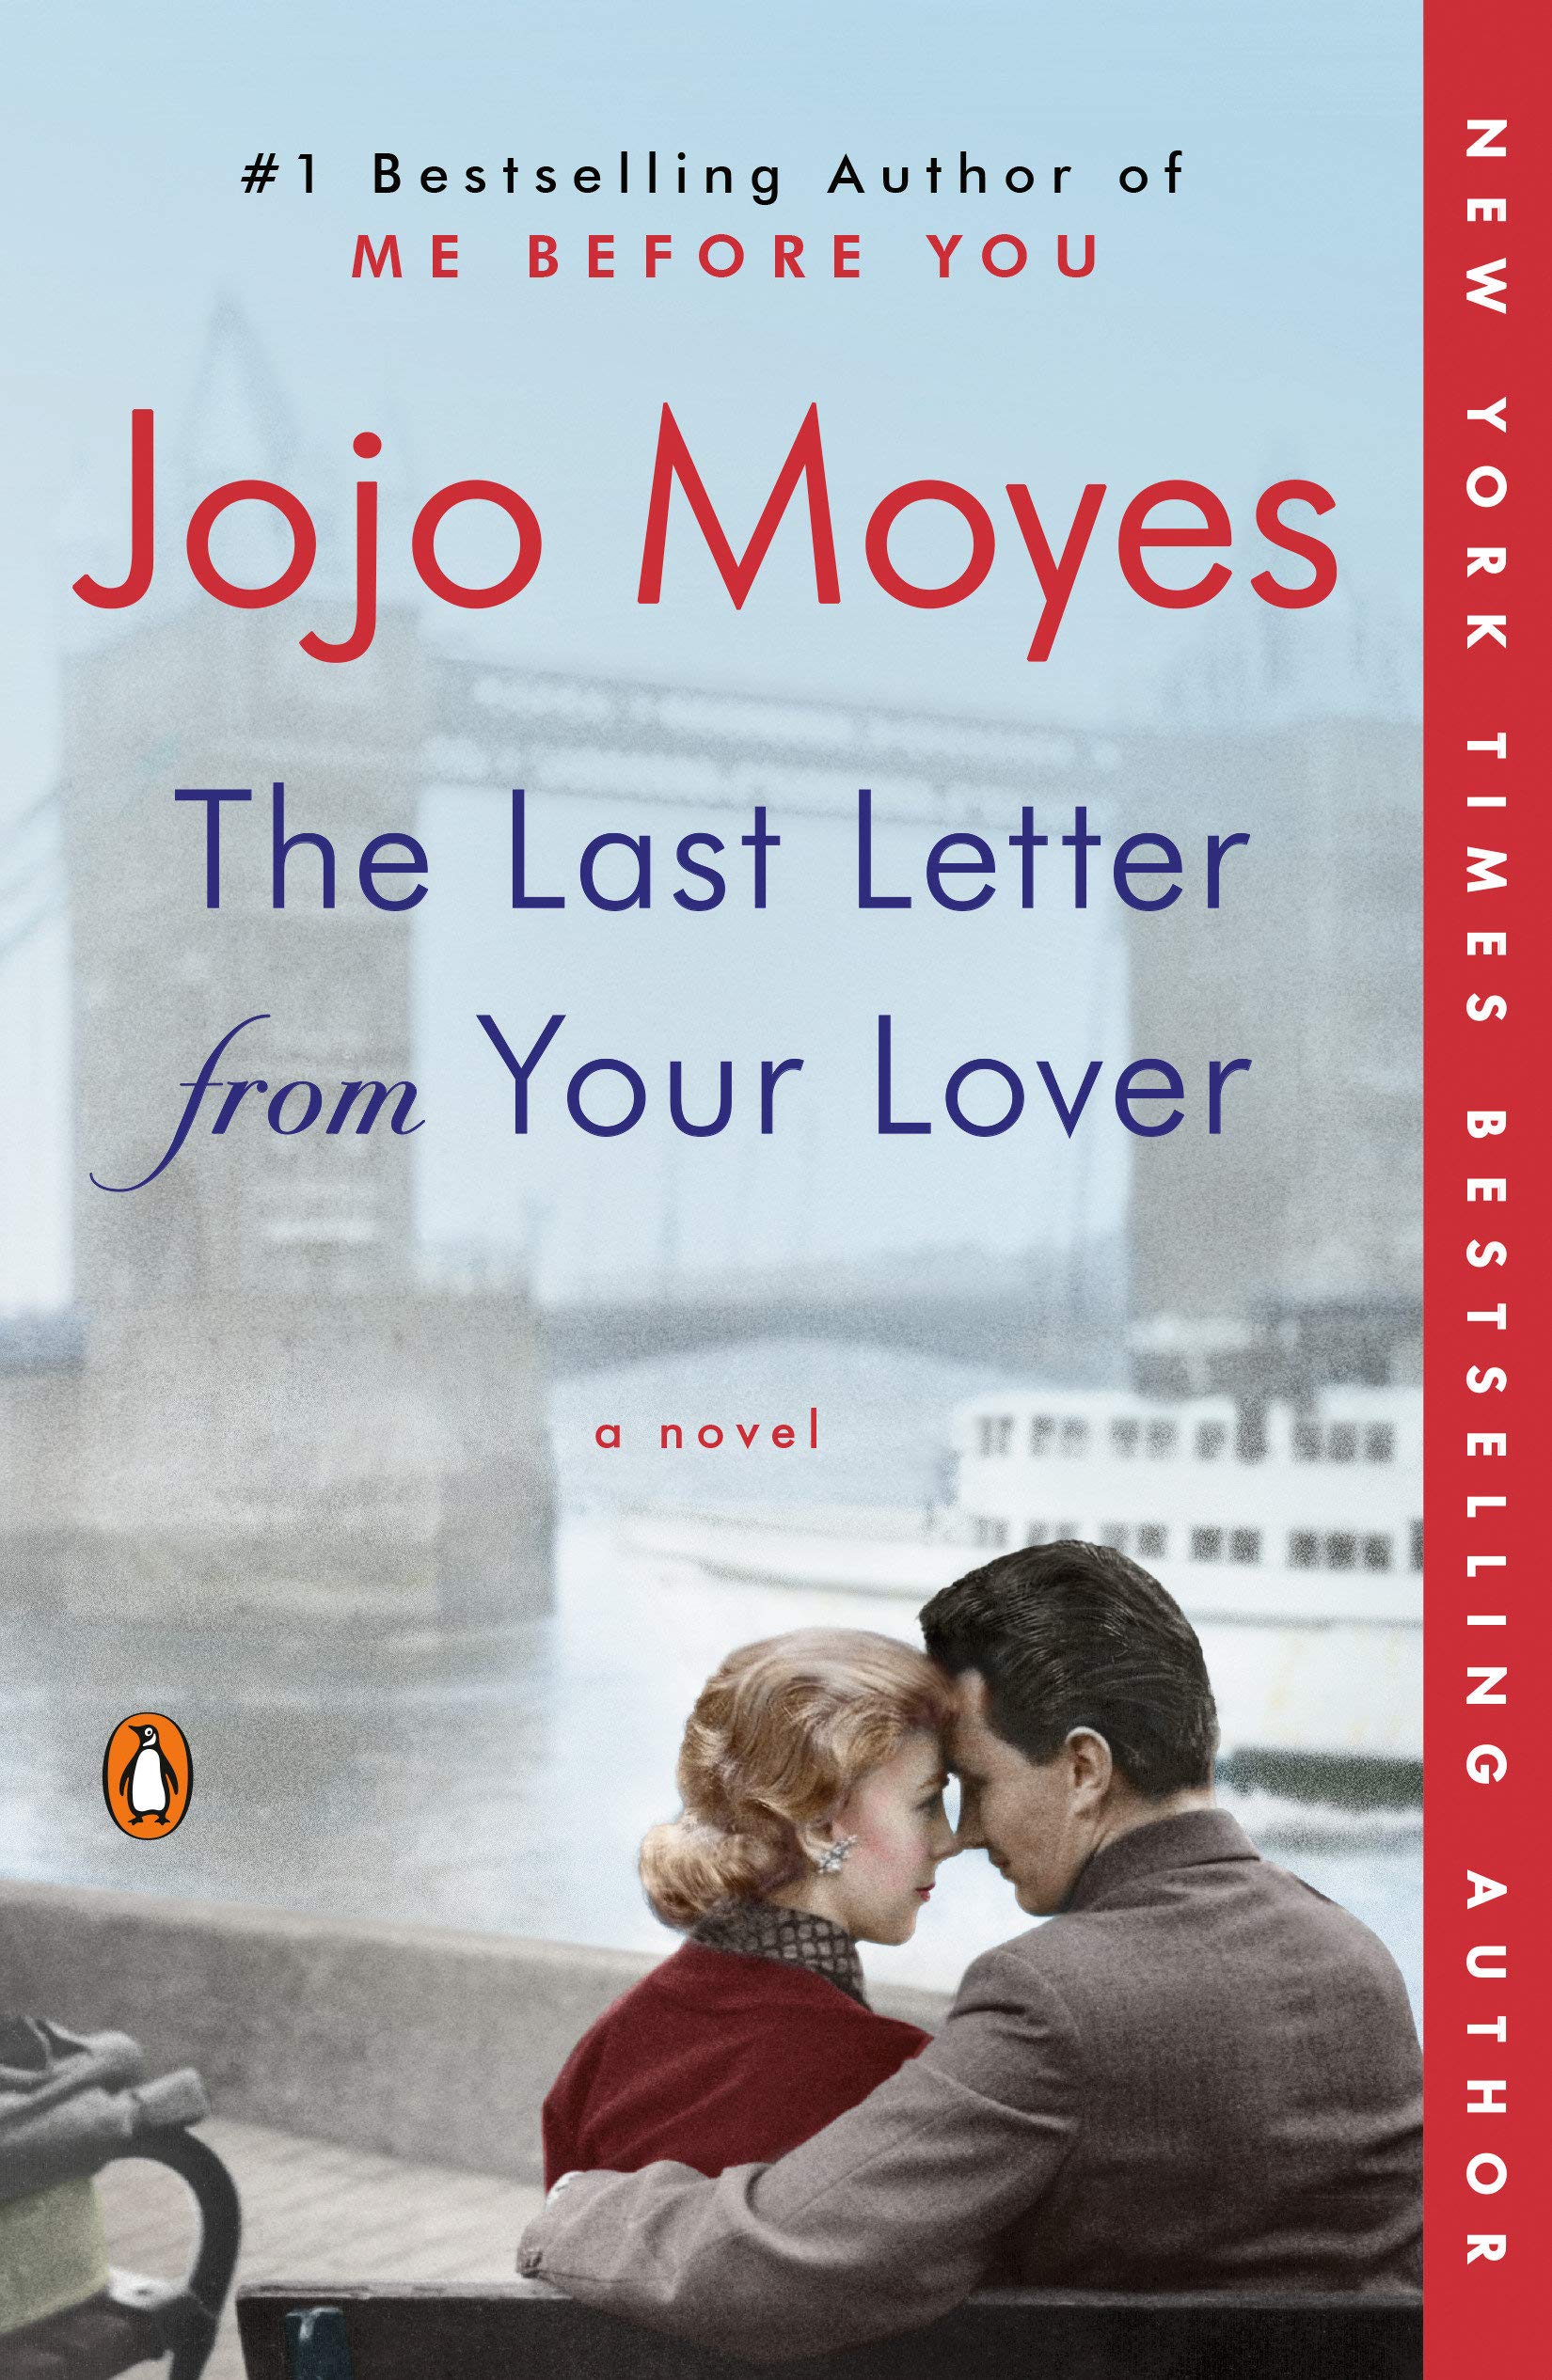 The Last Letter from Your Lover by Jojo Moyes Lavender Hill Designs Book Club December